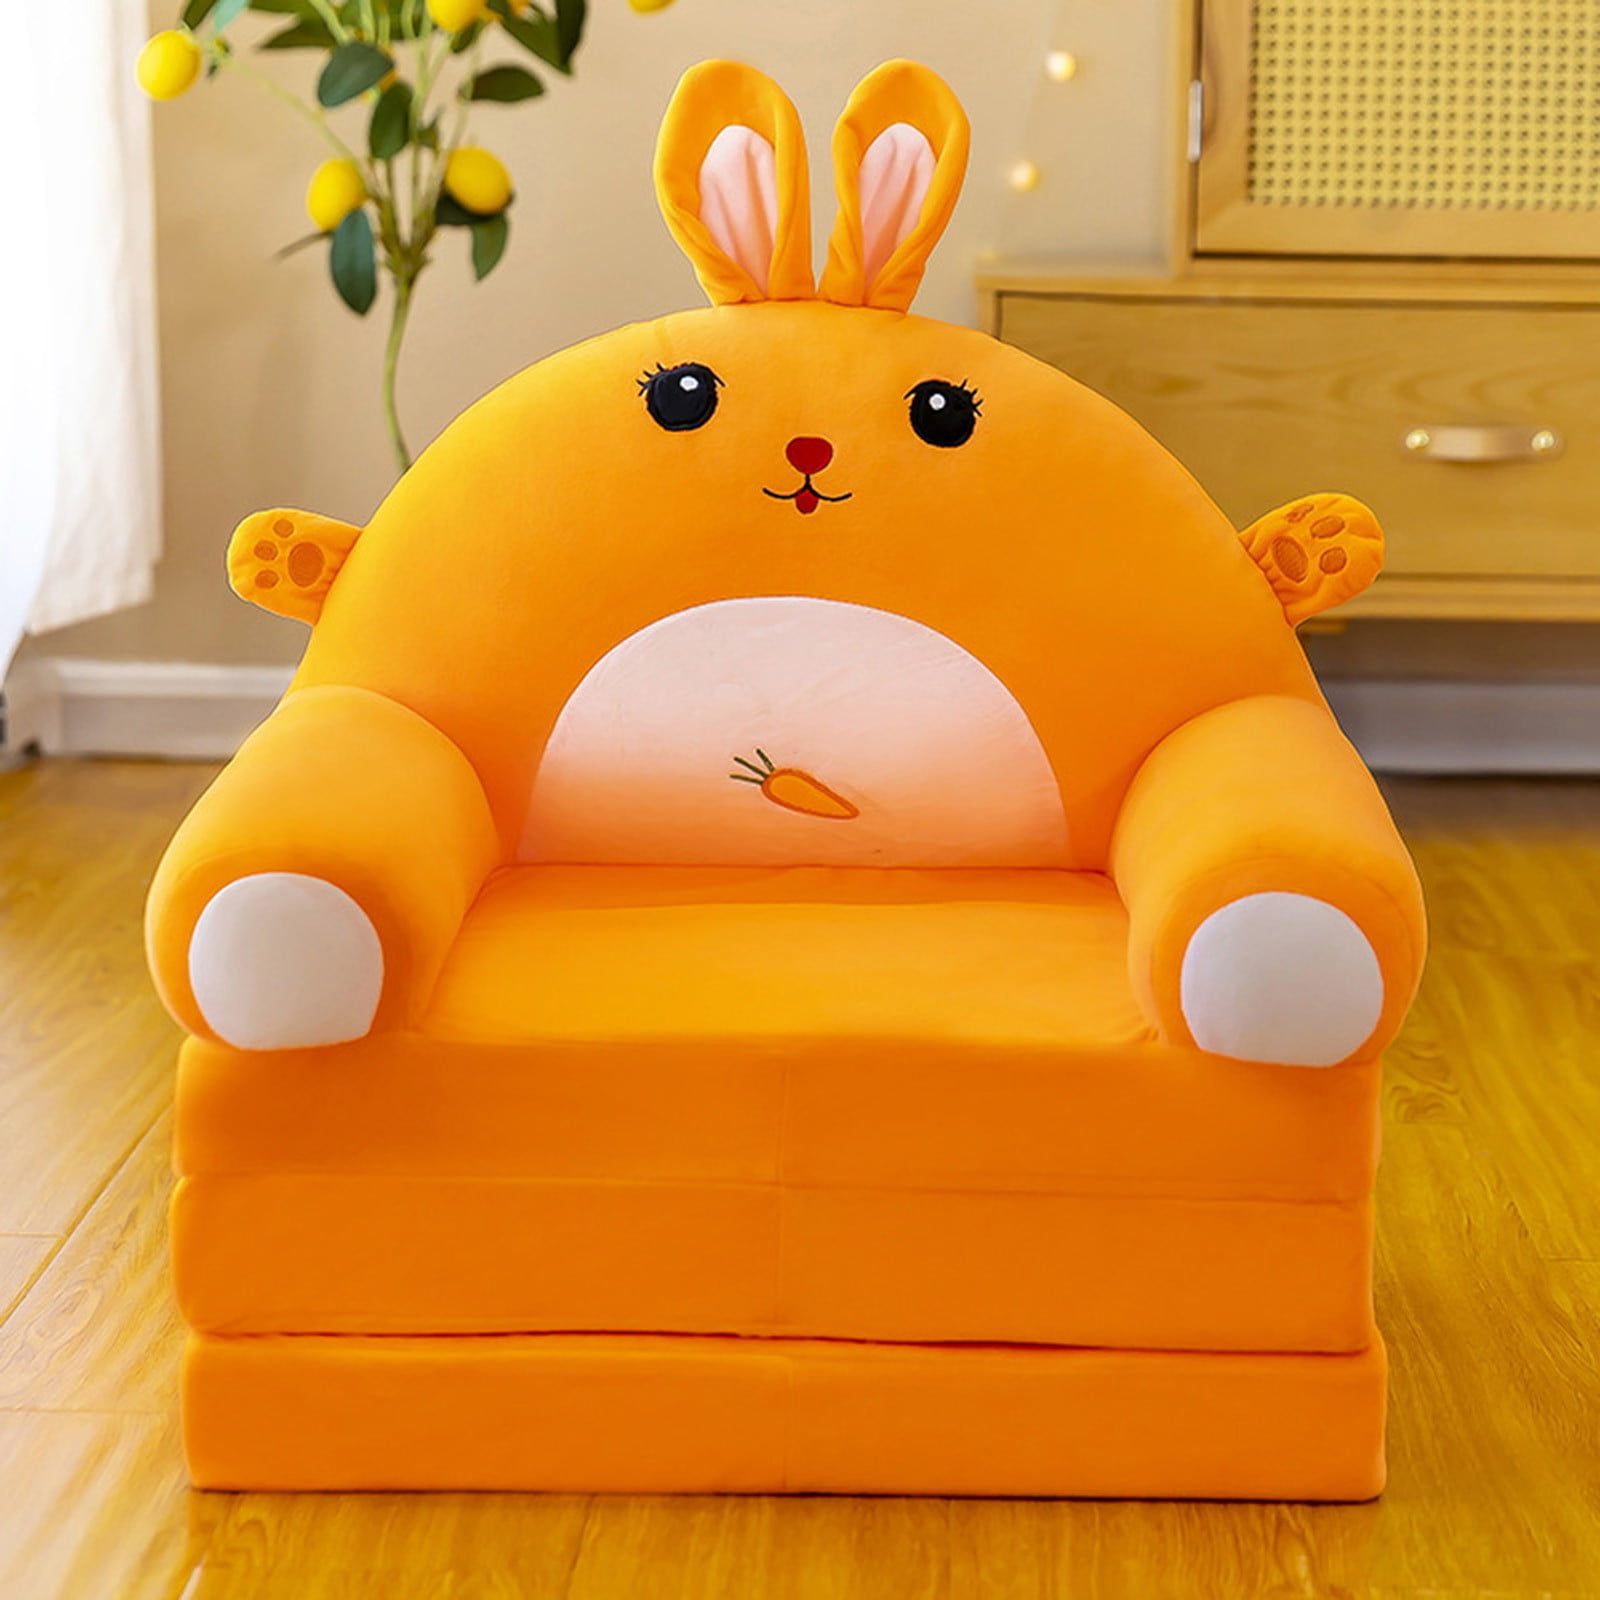 Latest Plush Foldable Kids Sofa Backrest Armchair 2 In 1 Foldable Children Intended For 2 In 1 Foldable Children's Sofa Beds (View 13 of 15)